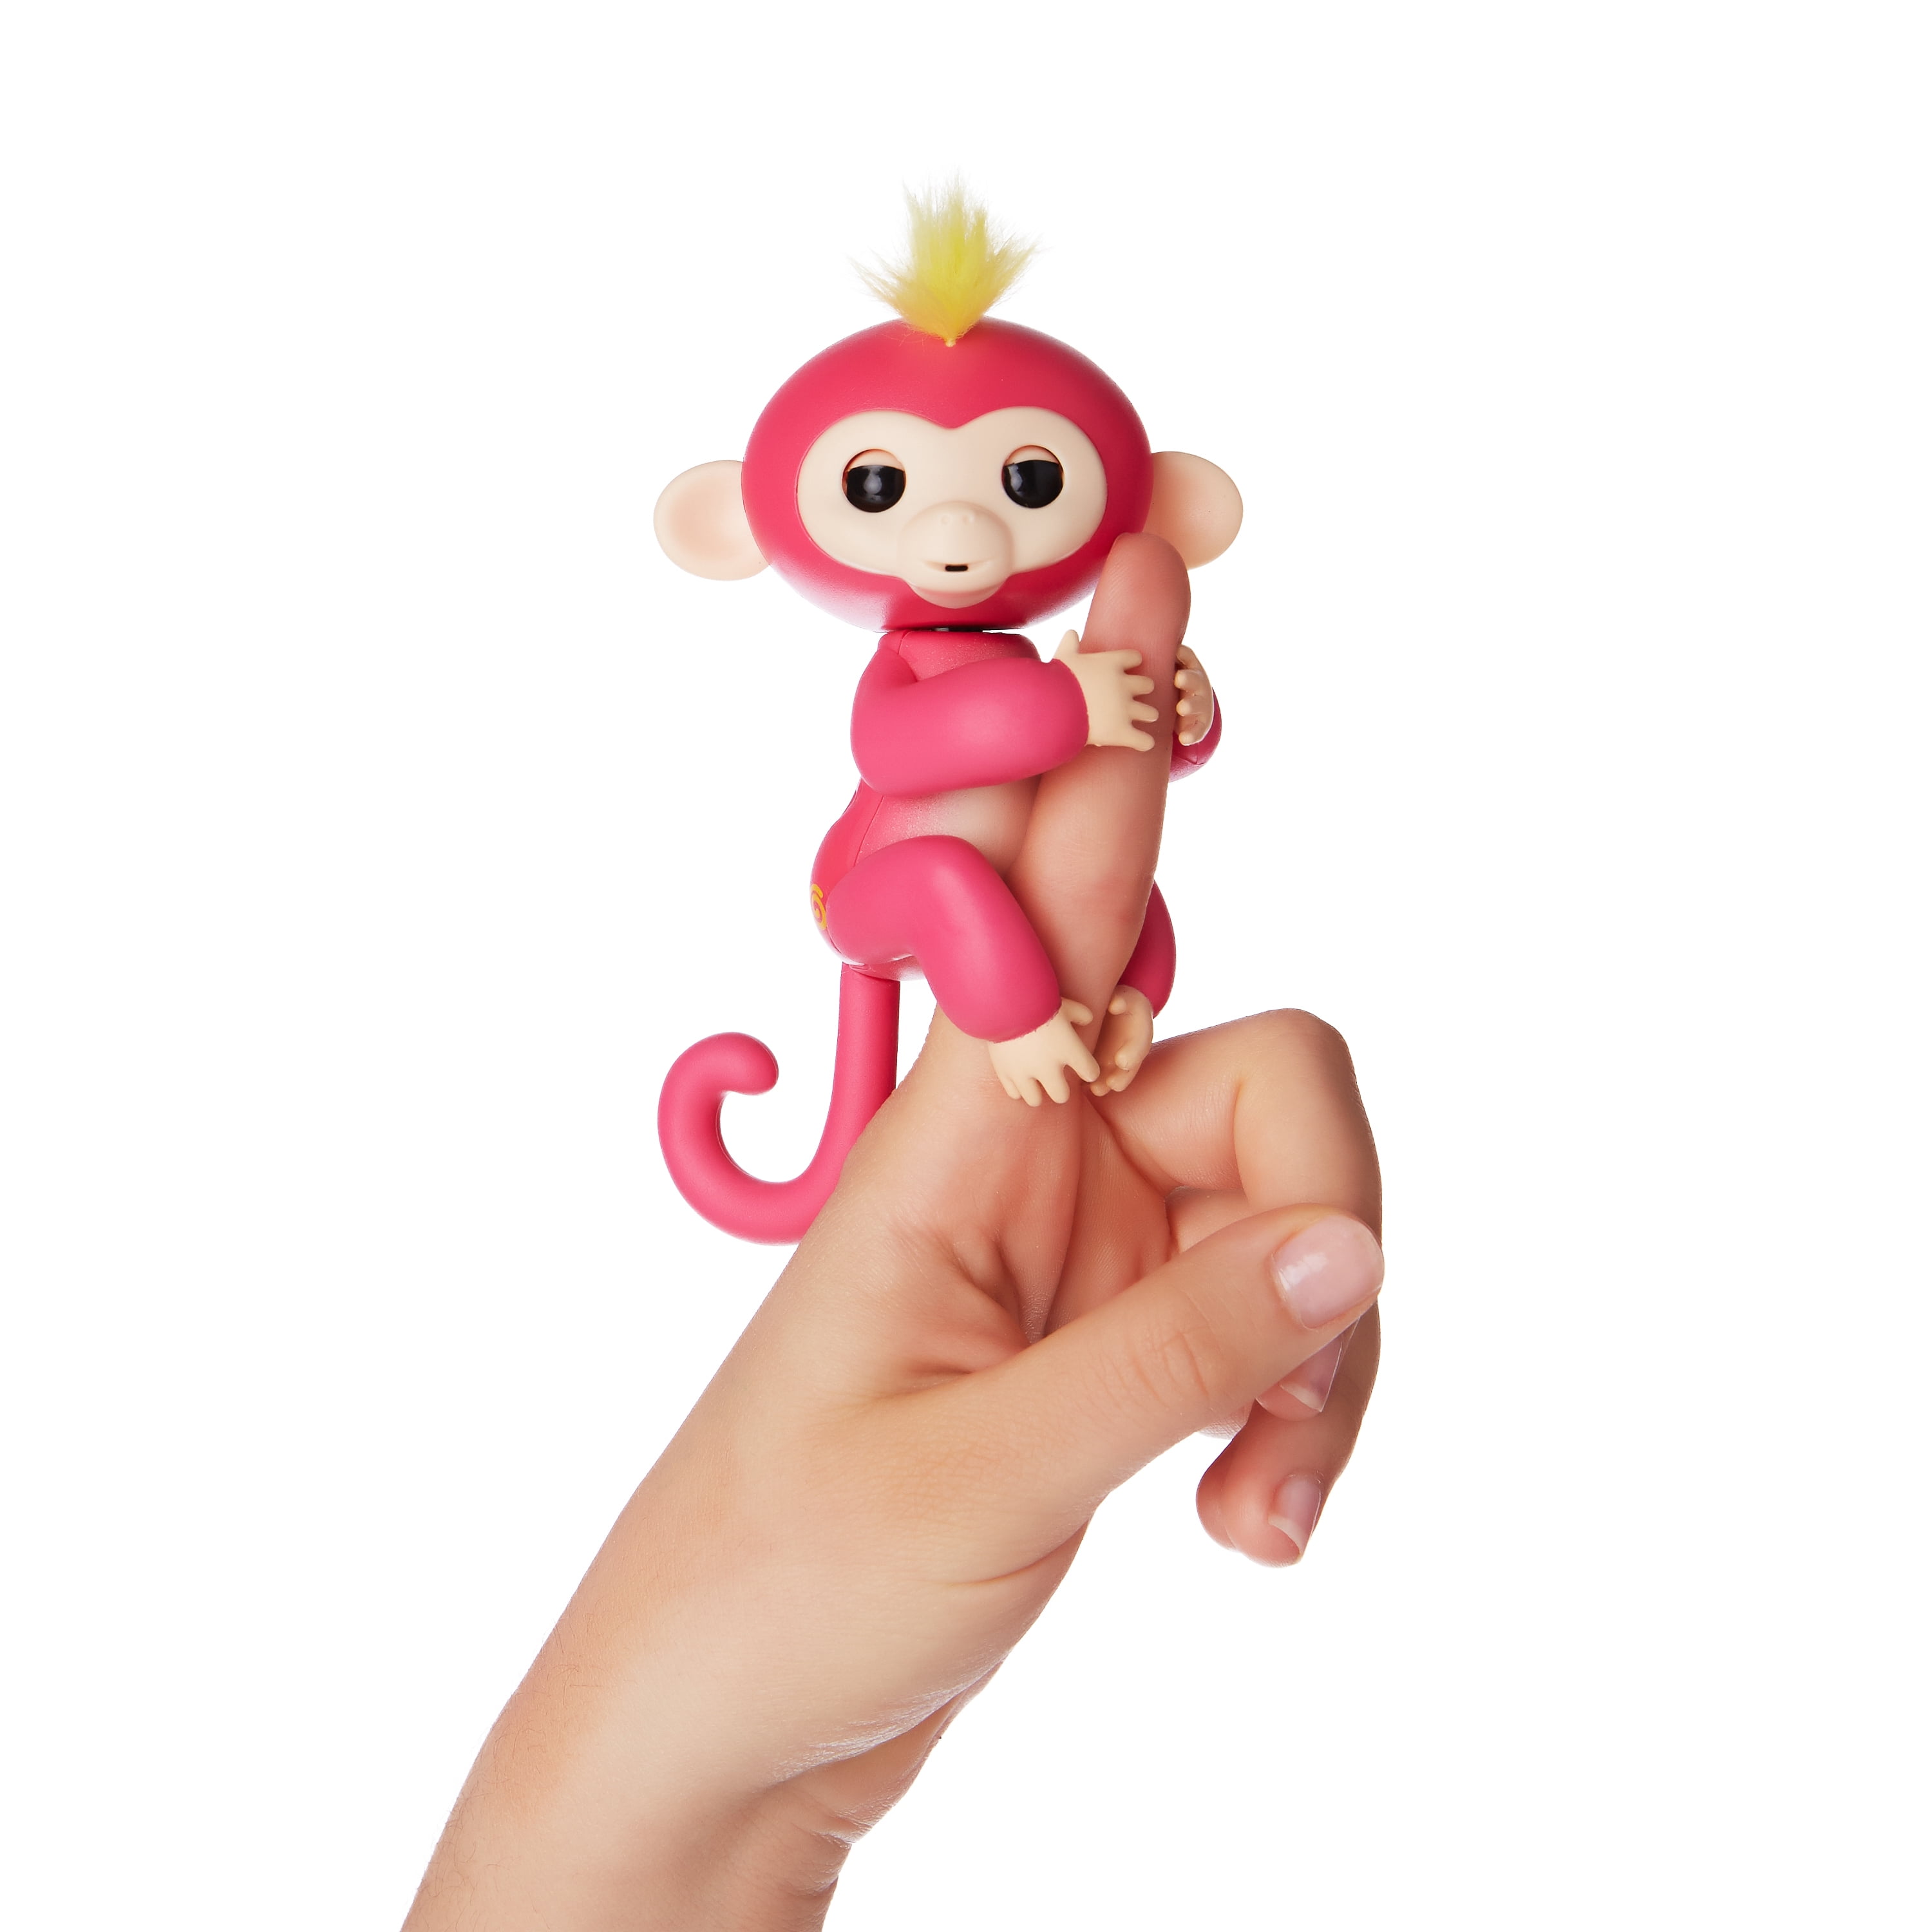 Sydney Fingerlings 2Tone Monkey Purple with Pink Accents - Interactive Baby Pet 